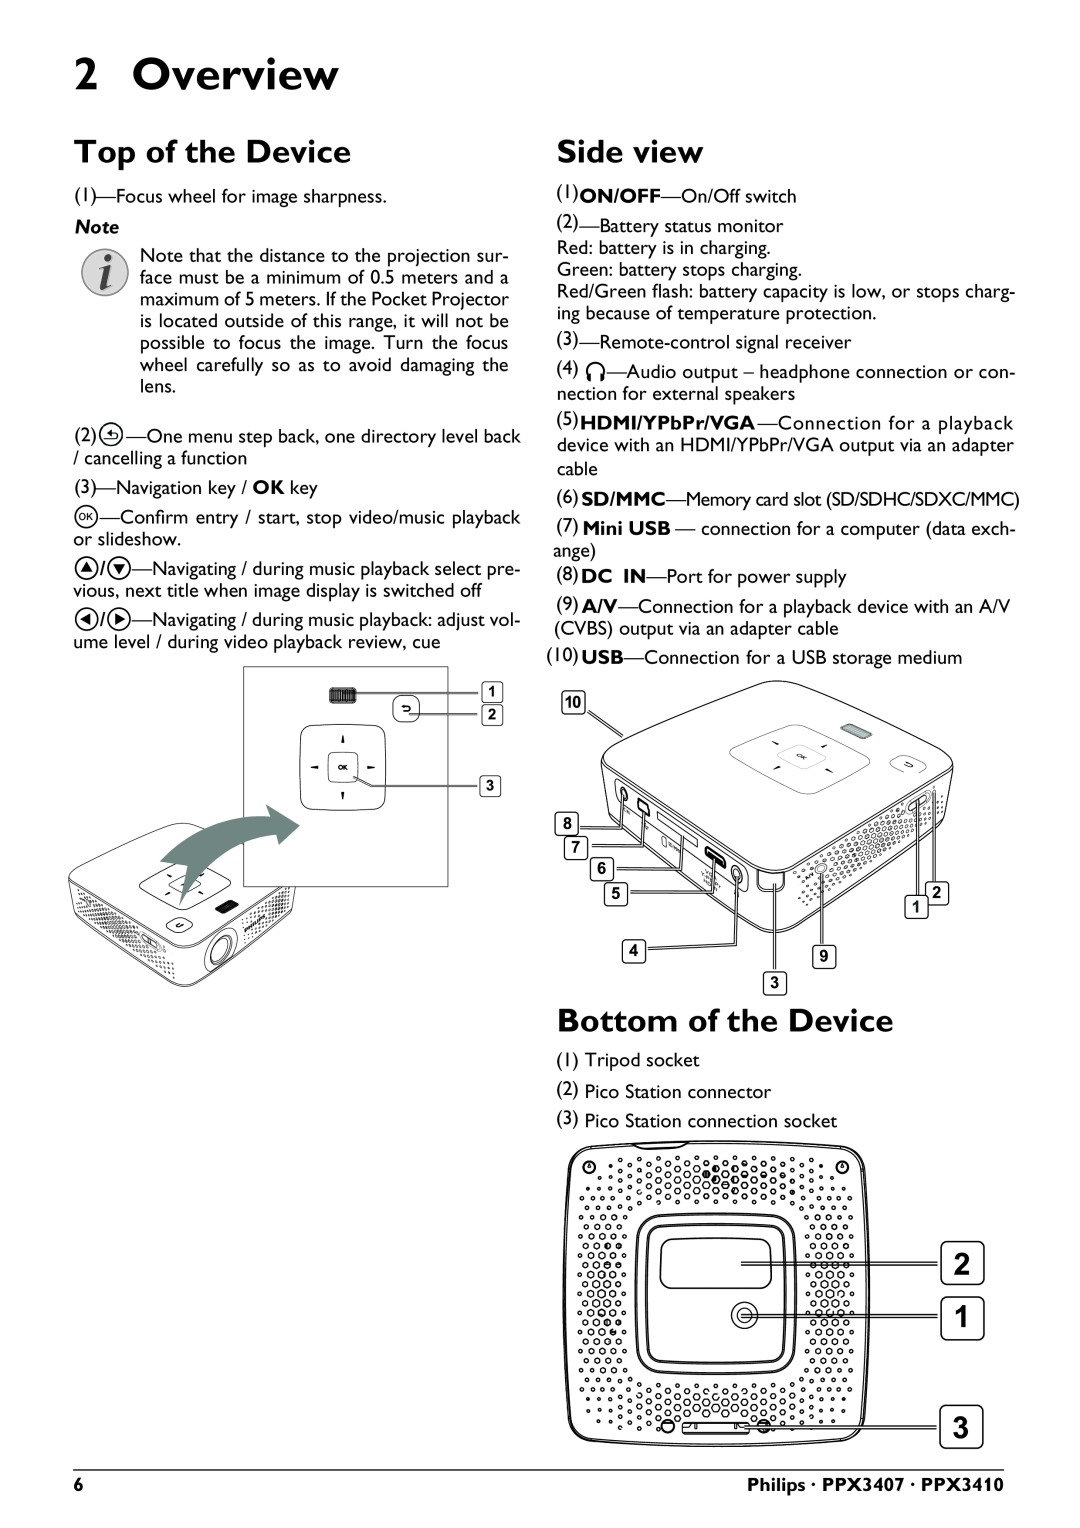 Philips PPX3407, PPX3410 user manual Overview, Top of the Device, Side view, Bottom of the Device 